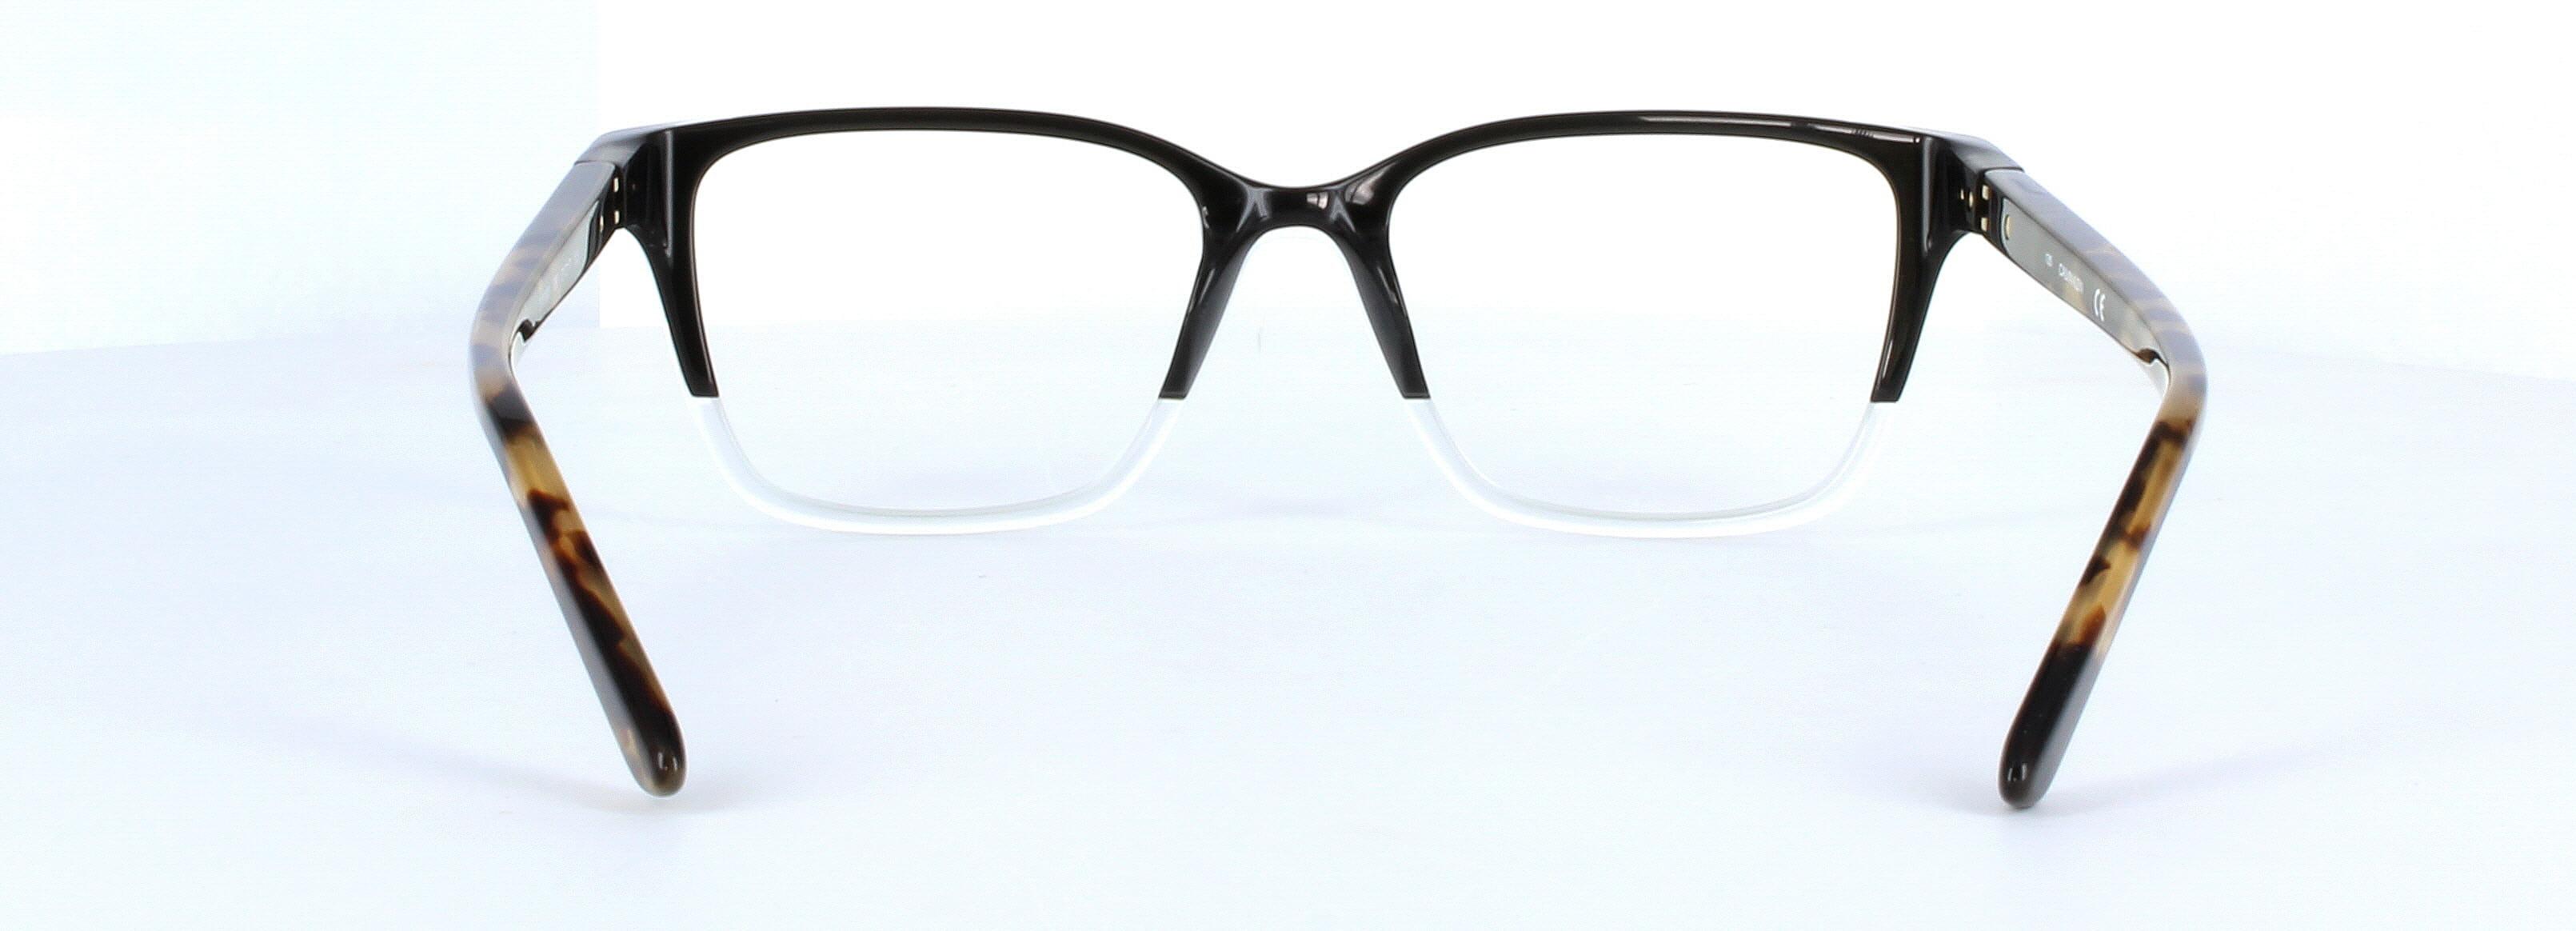 CK19506-095 - Unisex 2-tone acetate glasses with spring hinged arms - Black & crystal - image view 3